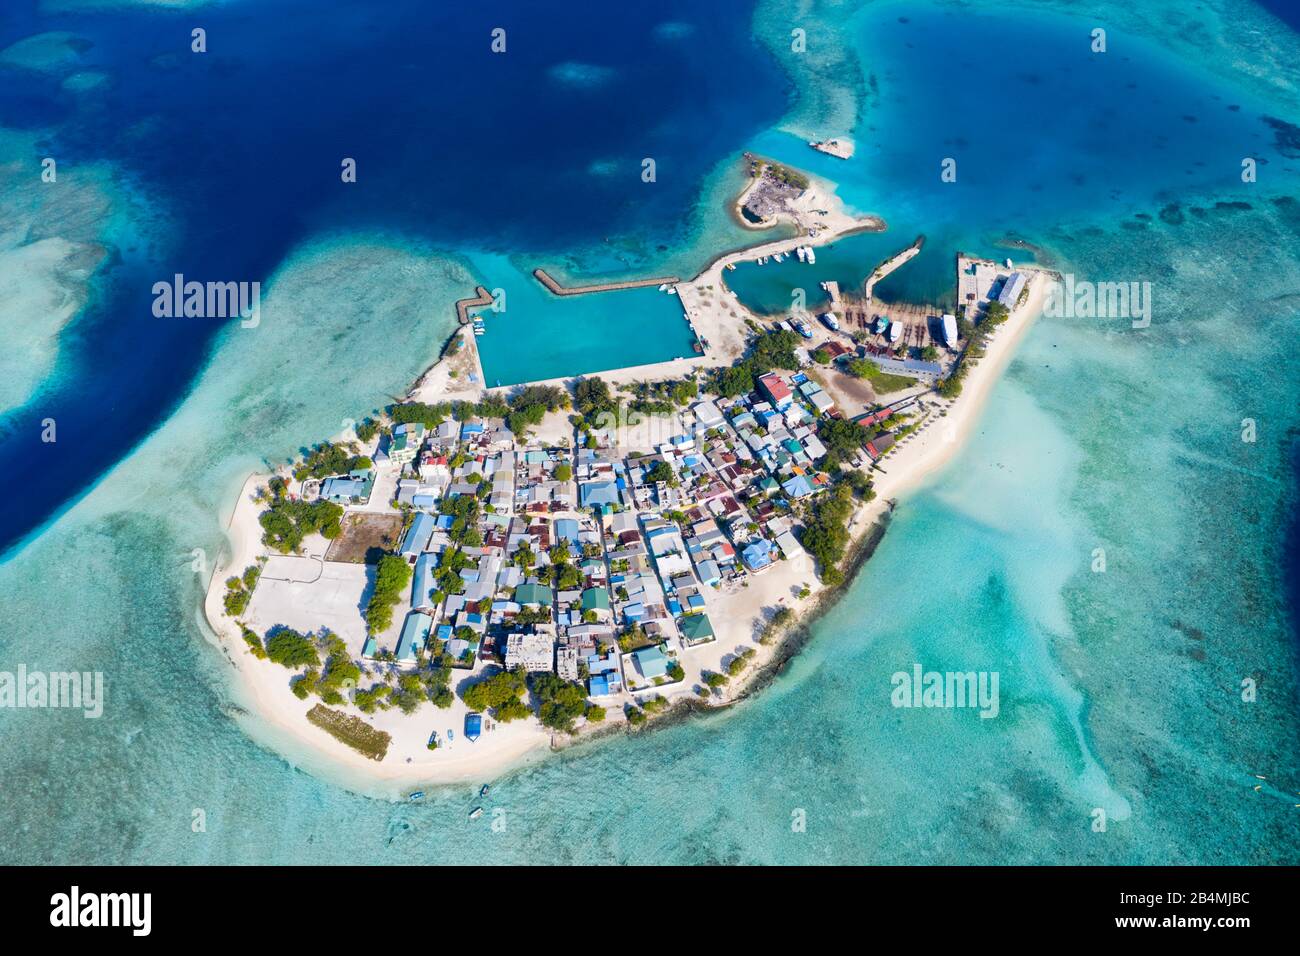 Inhabited Island Gulhi, South Male Atoll, Indian Ocean, Maldives Stock Photo